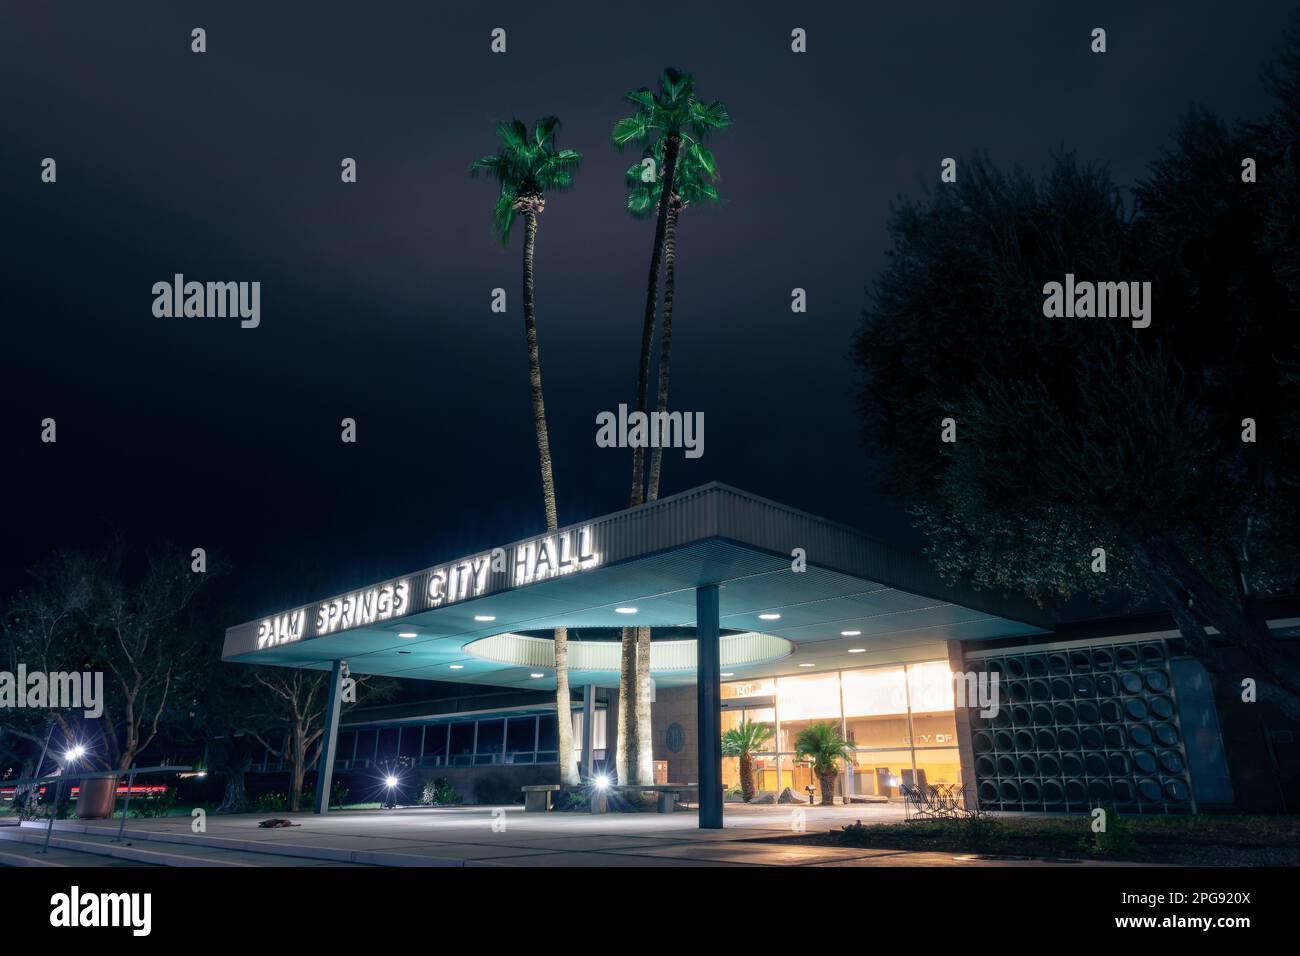 Palm Springs City Hall Midcentury modern architecture at night, California Stock Photo